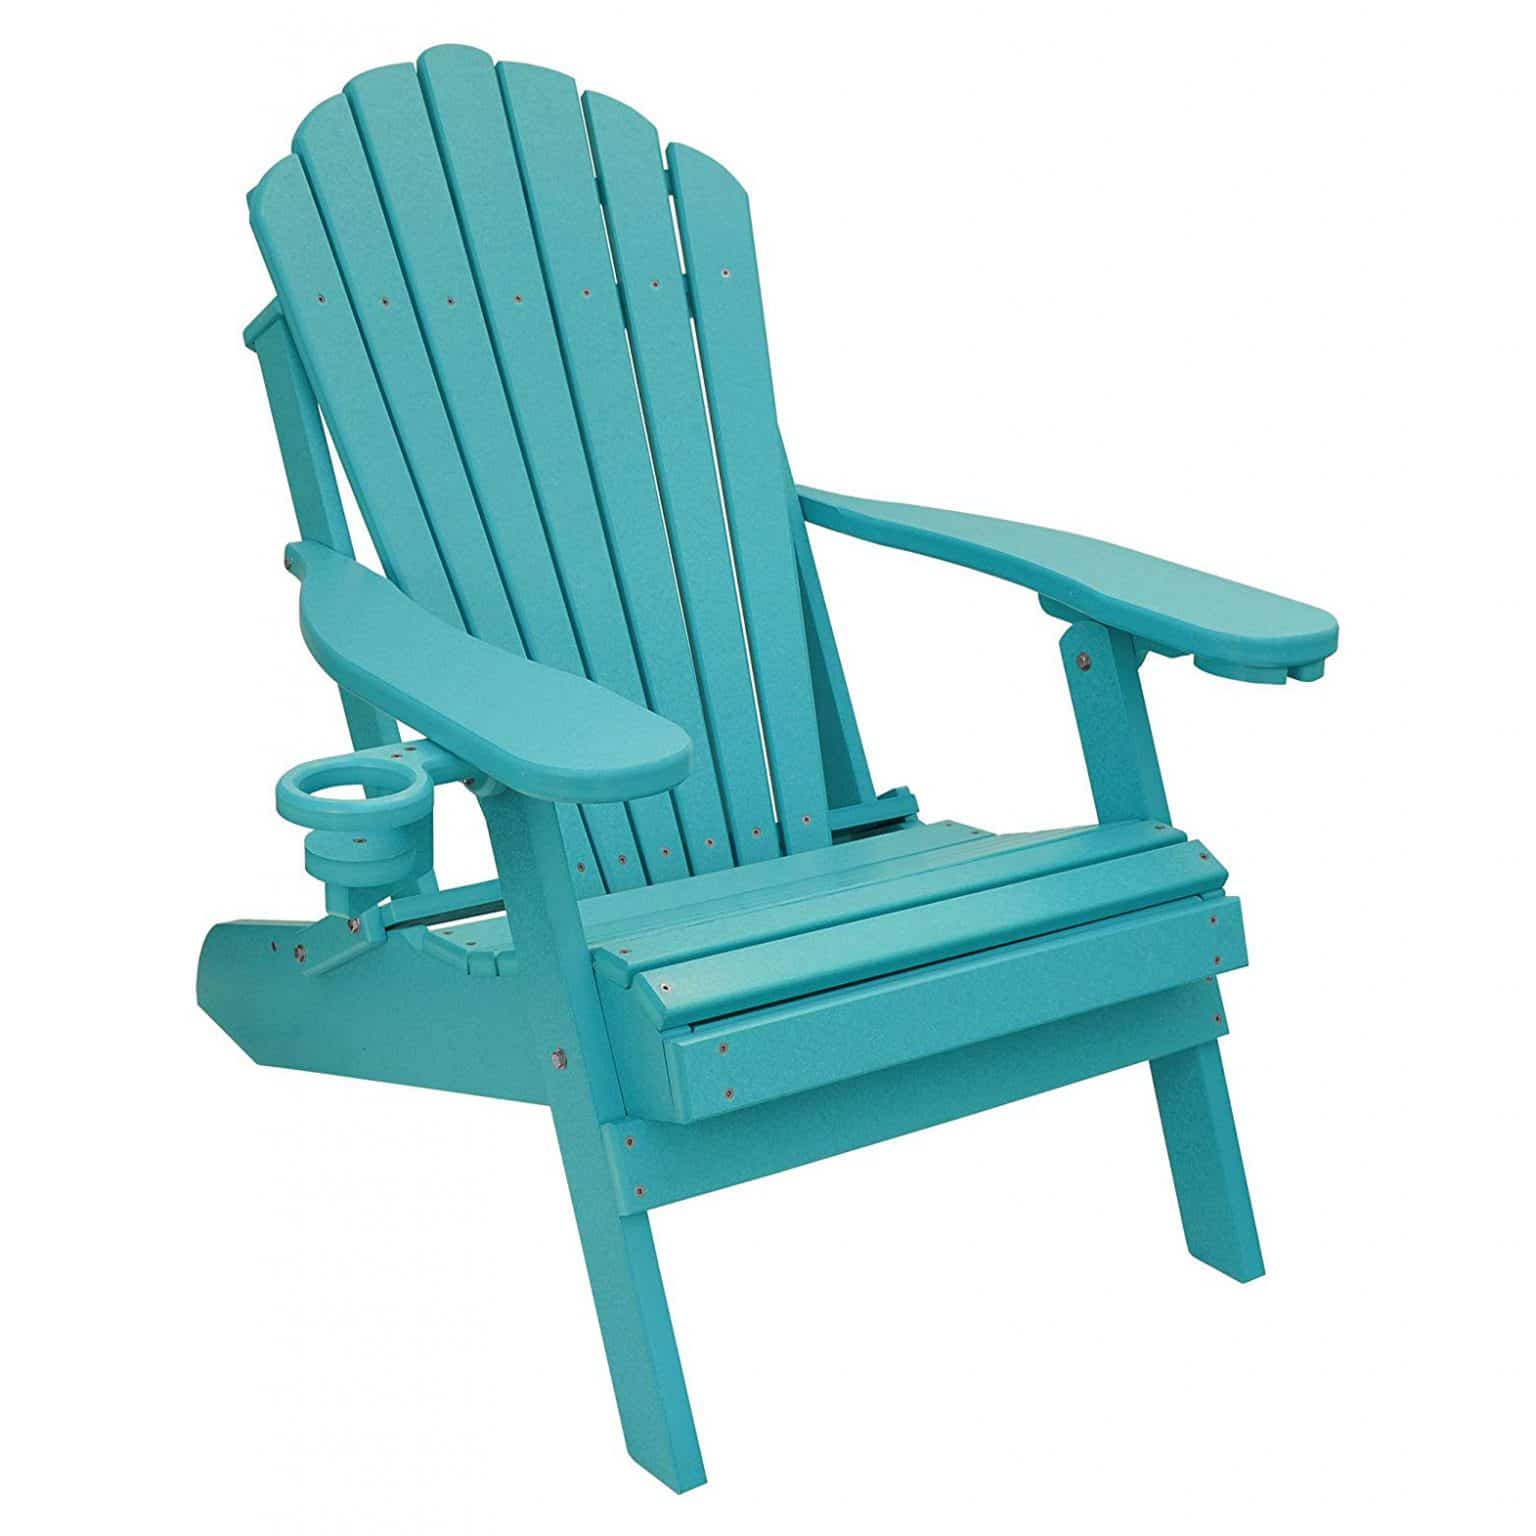 6. Outer Banks Deluxe Folding Adirondack Chair 1536x1536 